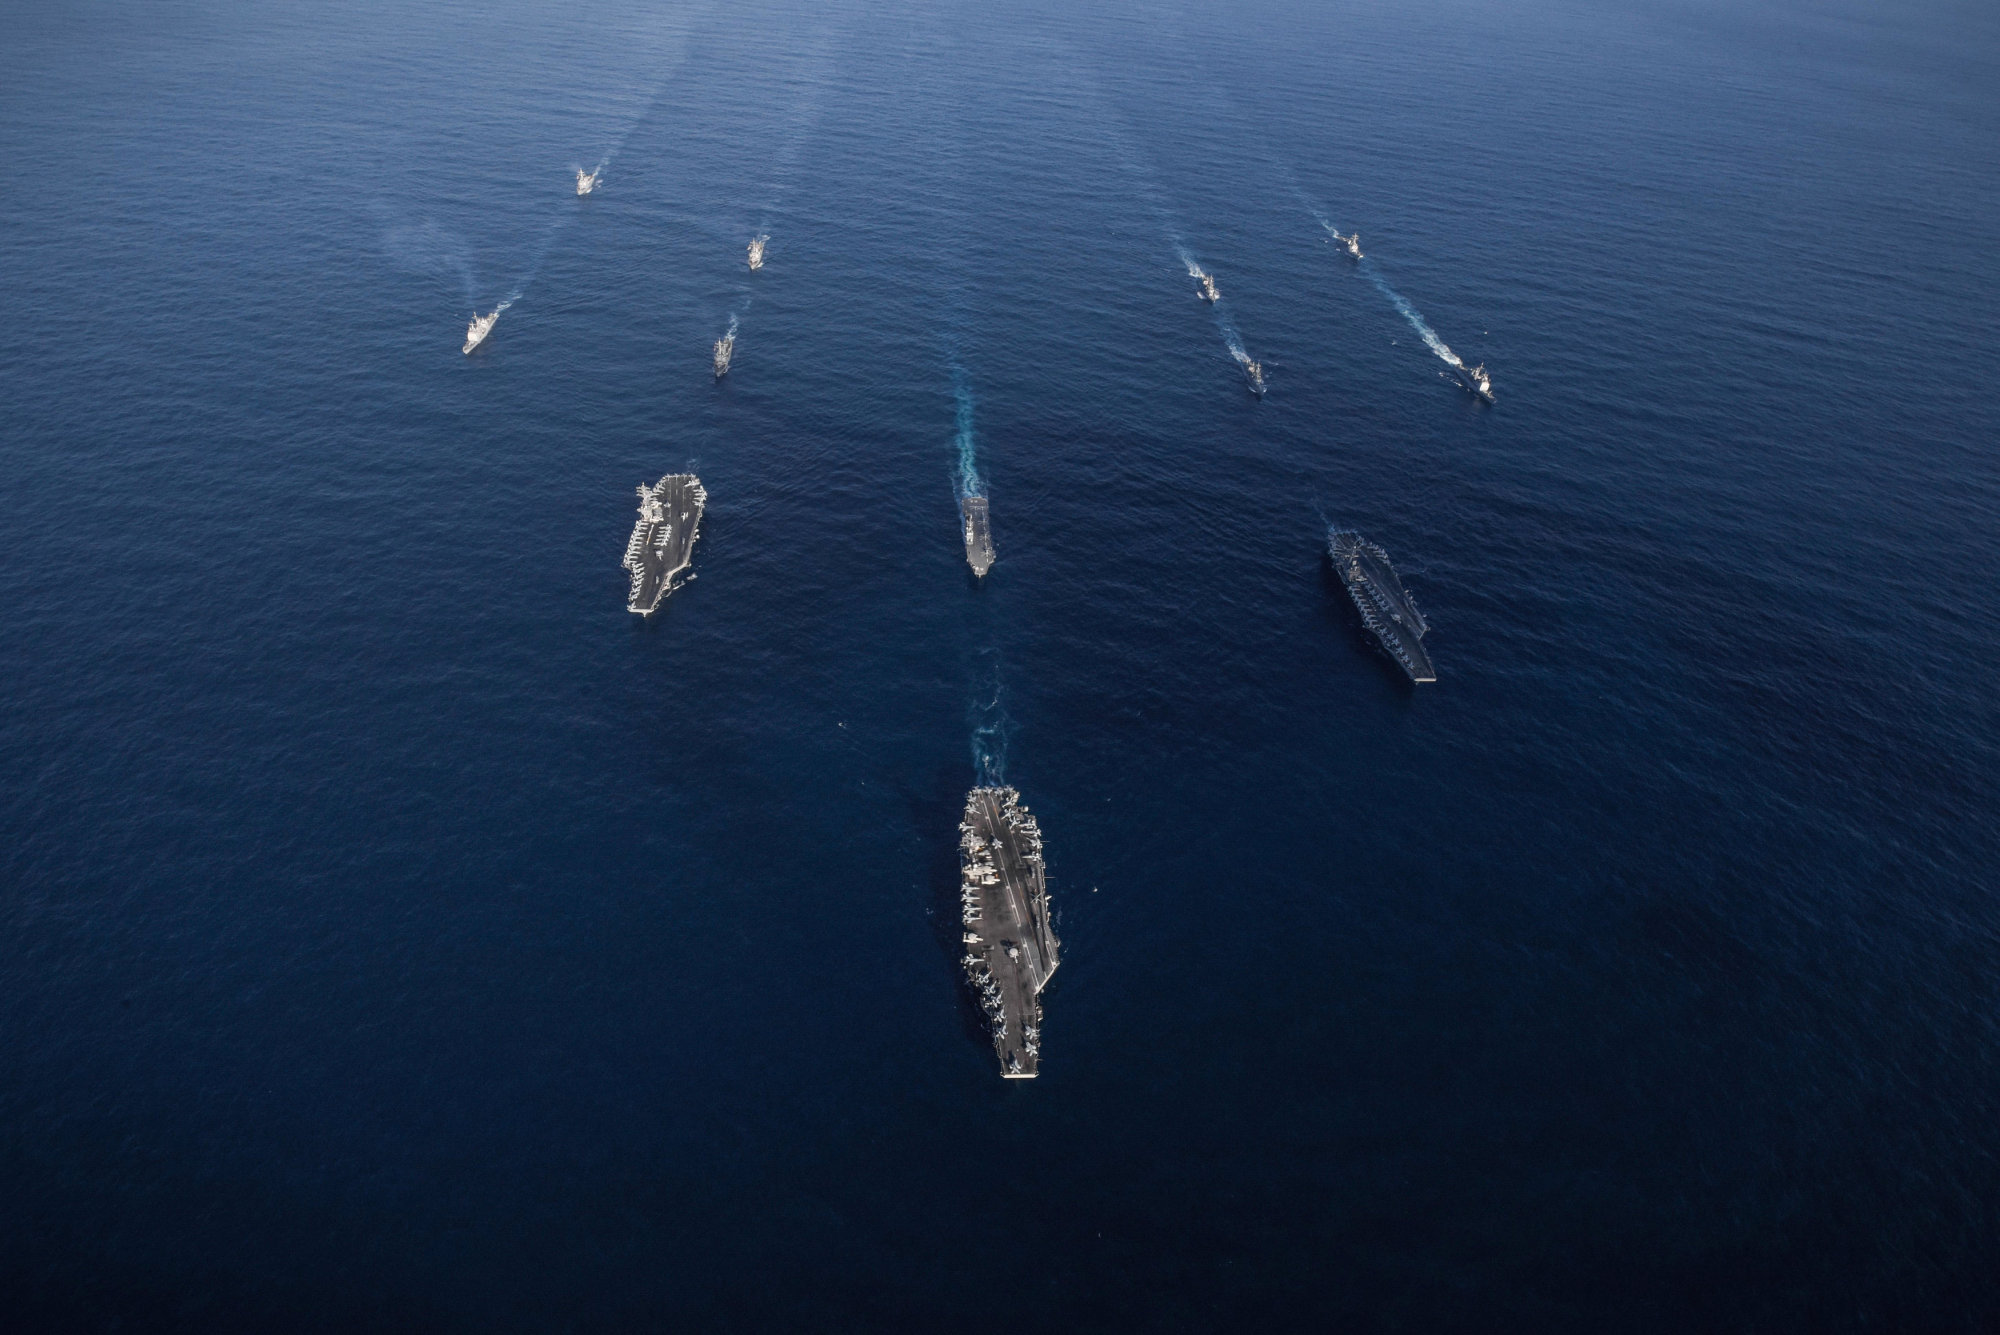 The USS Ronald Reagan, USS Theodore Roosevelt and USS Nimitz carrier strike groups transit the western Pacific Ocean with ships from the Maritime Self-Defense Force during operations in international waters as part of a three-carrier strike force exercise on Sunday. | U.S. NAVY / VIA REUTERS